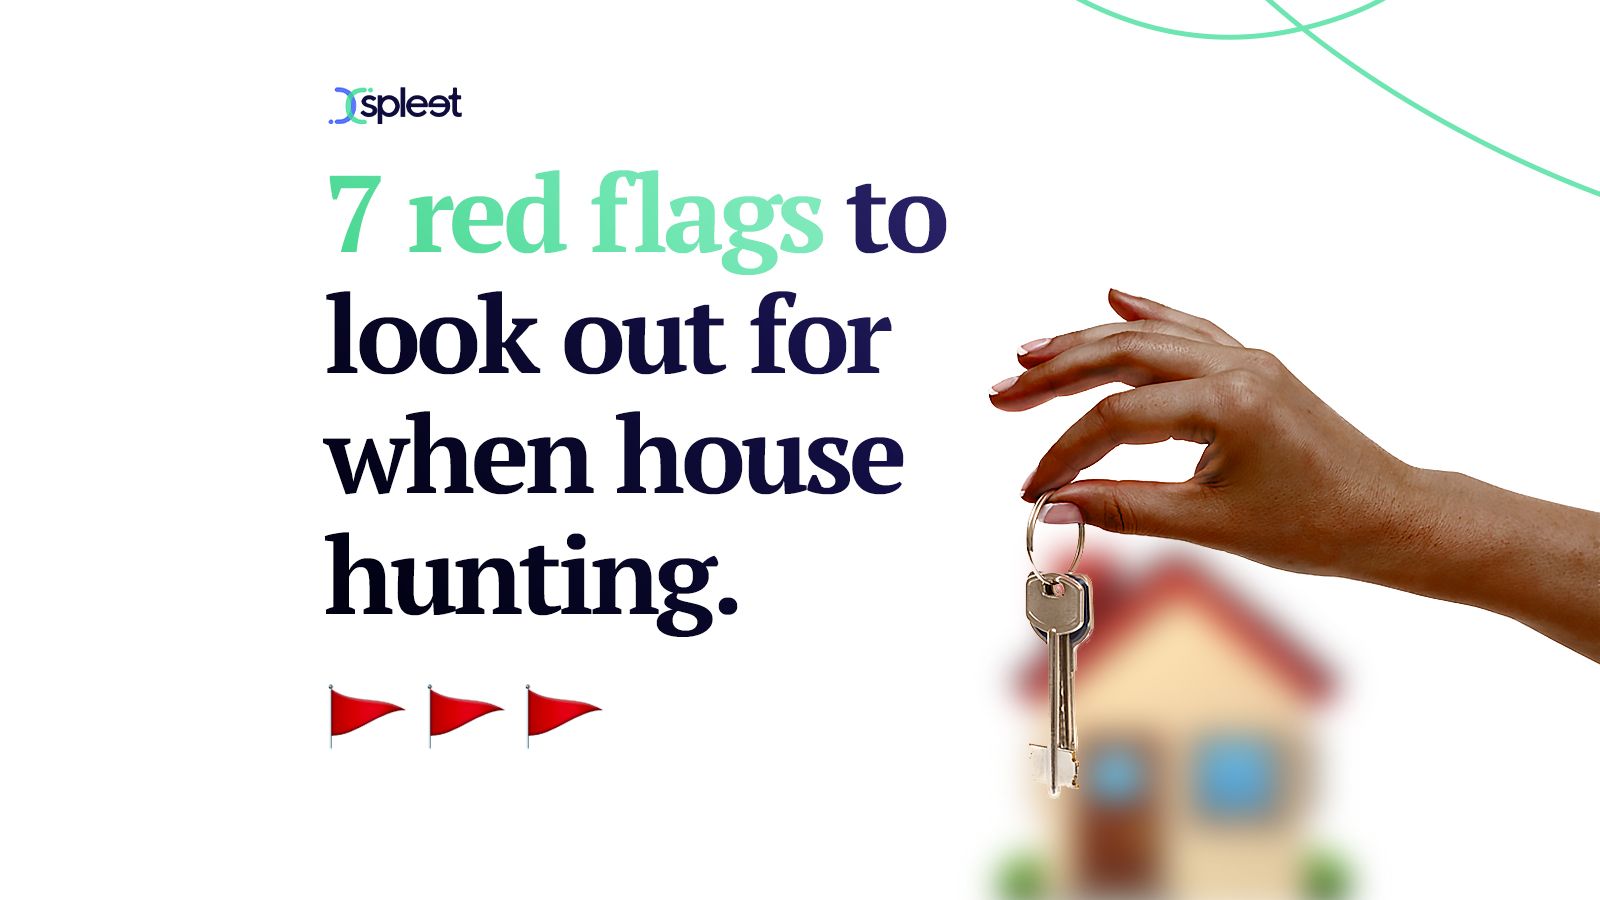 House hunting? Before you sign that rent agreement, here are 7 red flags to look out for. 🚩 🚩